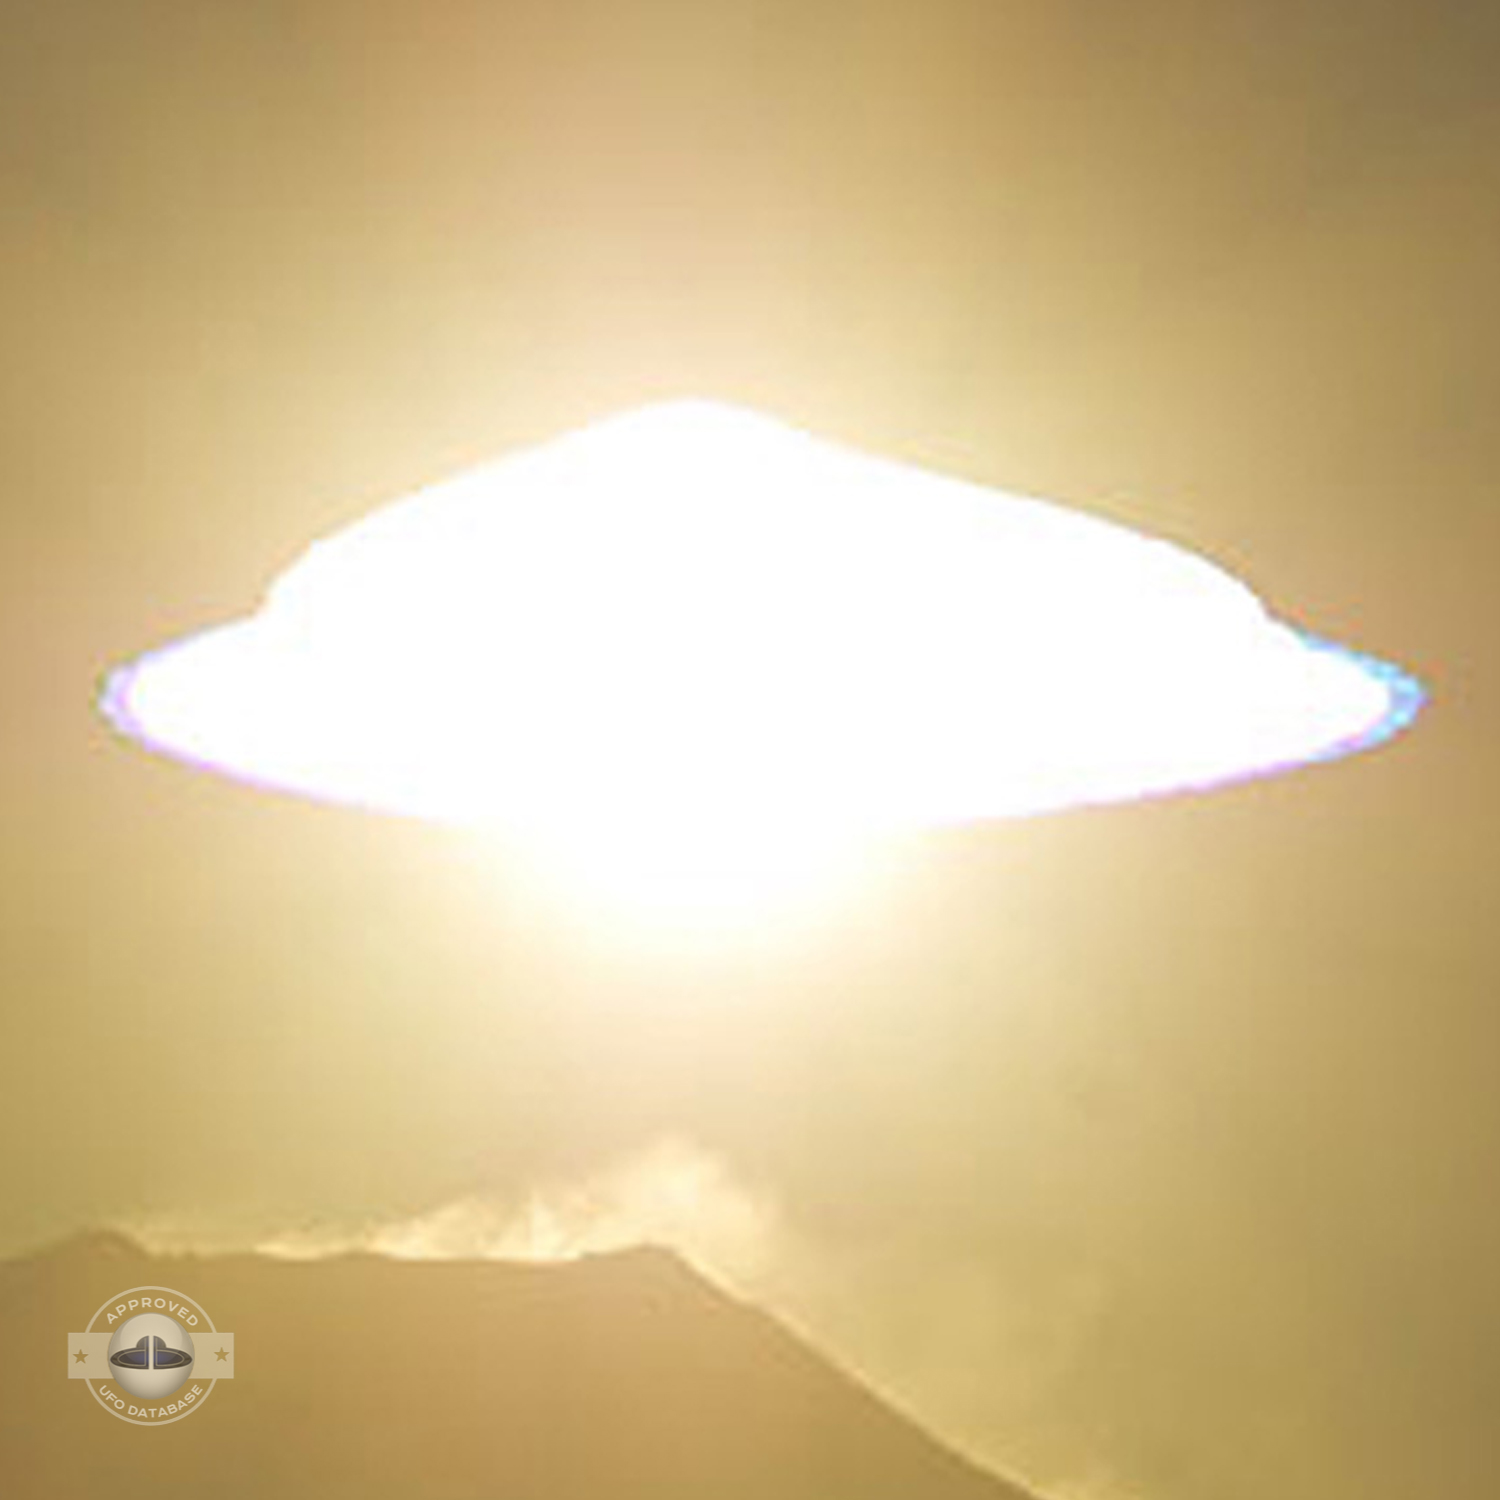 Gigantic bright glowing UFO mother ship over Mount Fuji | Japan | 2006 UFO Picture #227-3